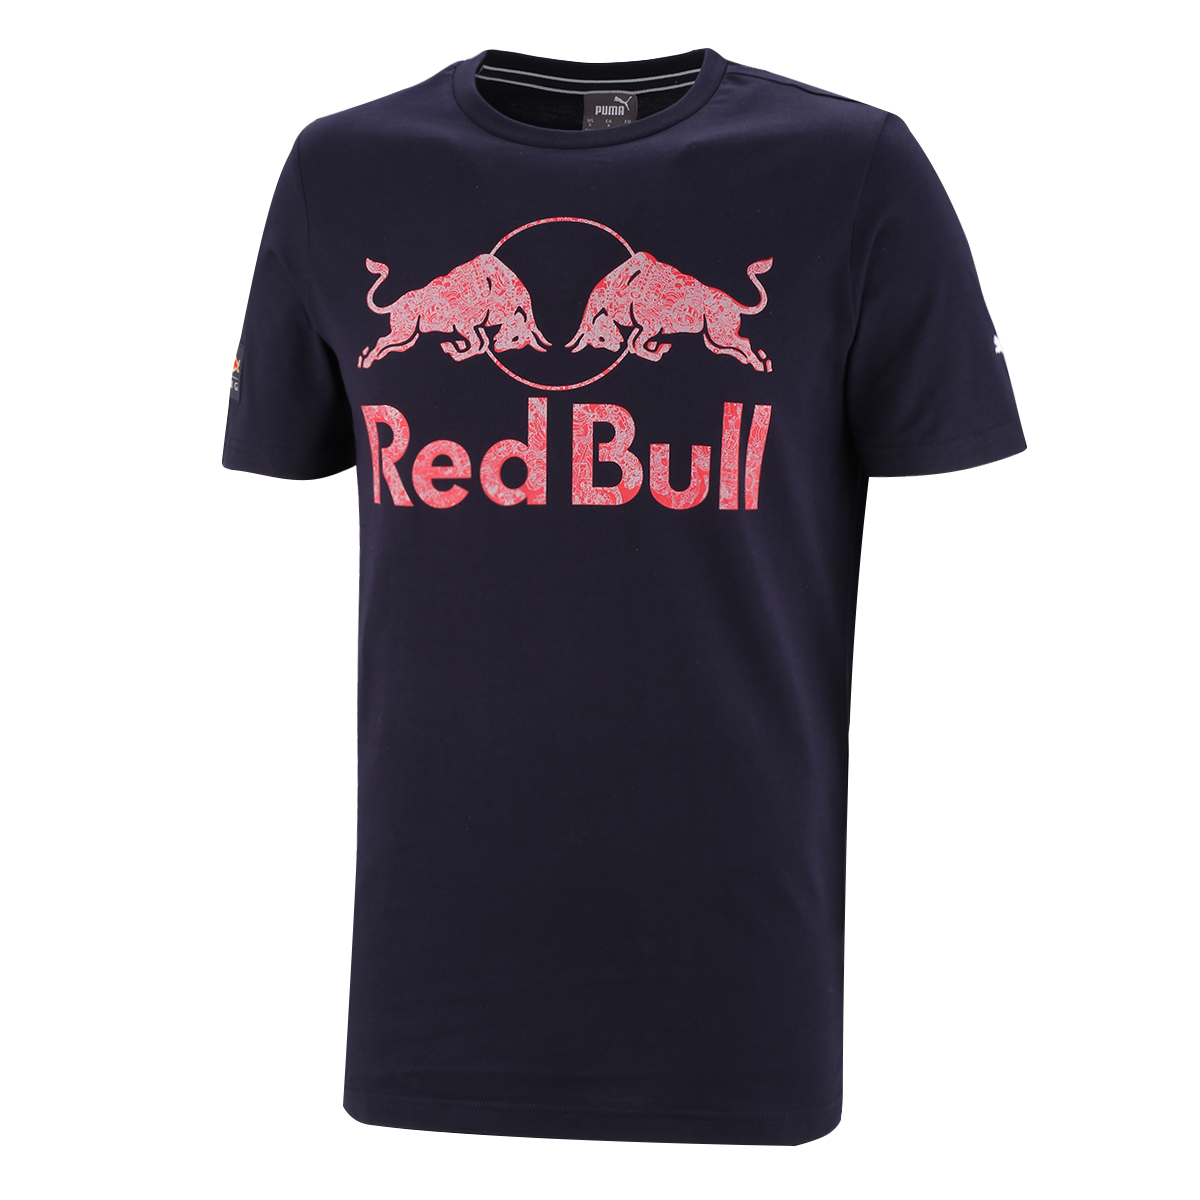 Remera Puma RBR Double Bull,  image number null